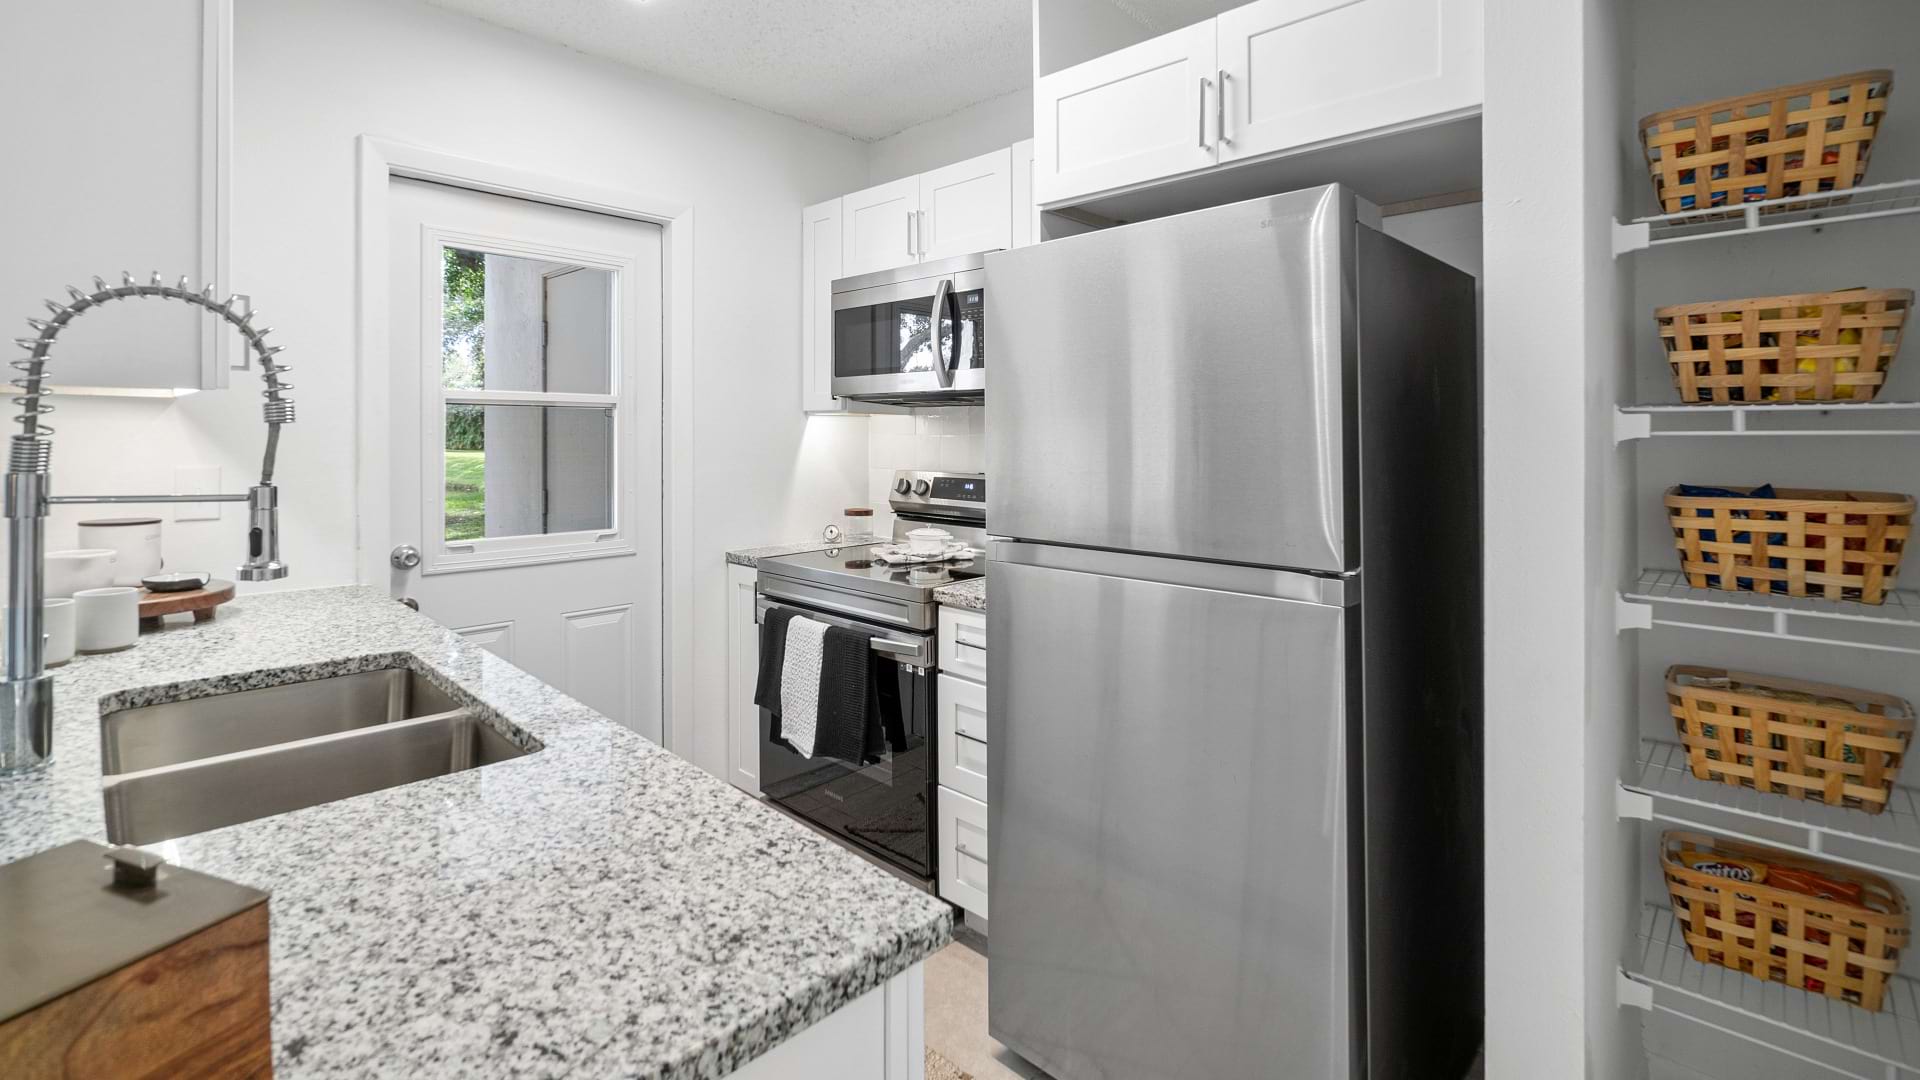 Stainless-Steel Appliances in the Kitchen of Out Modern Apartments in Pembroke Pines, FL